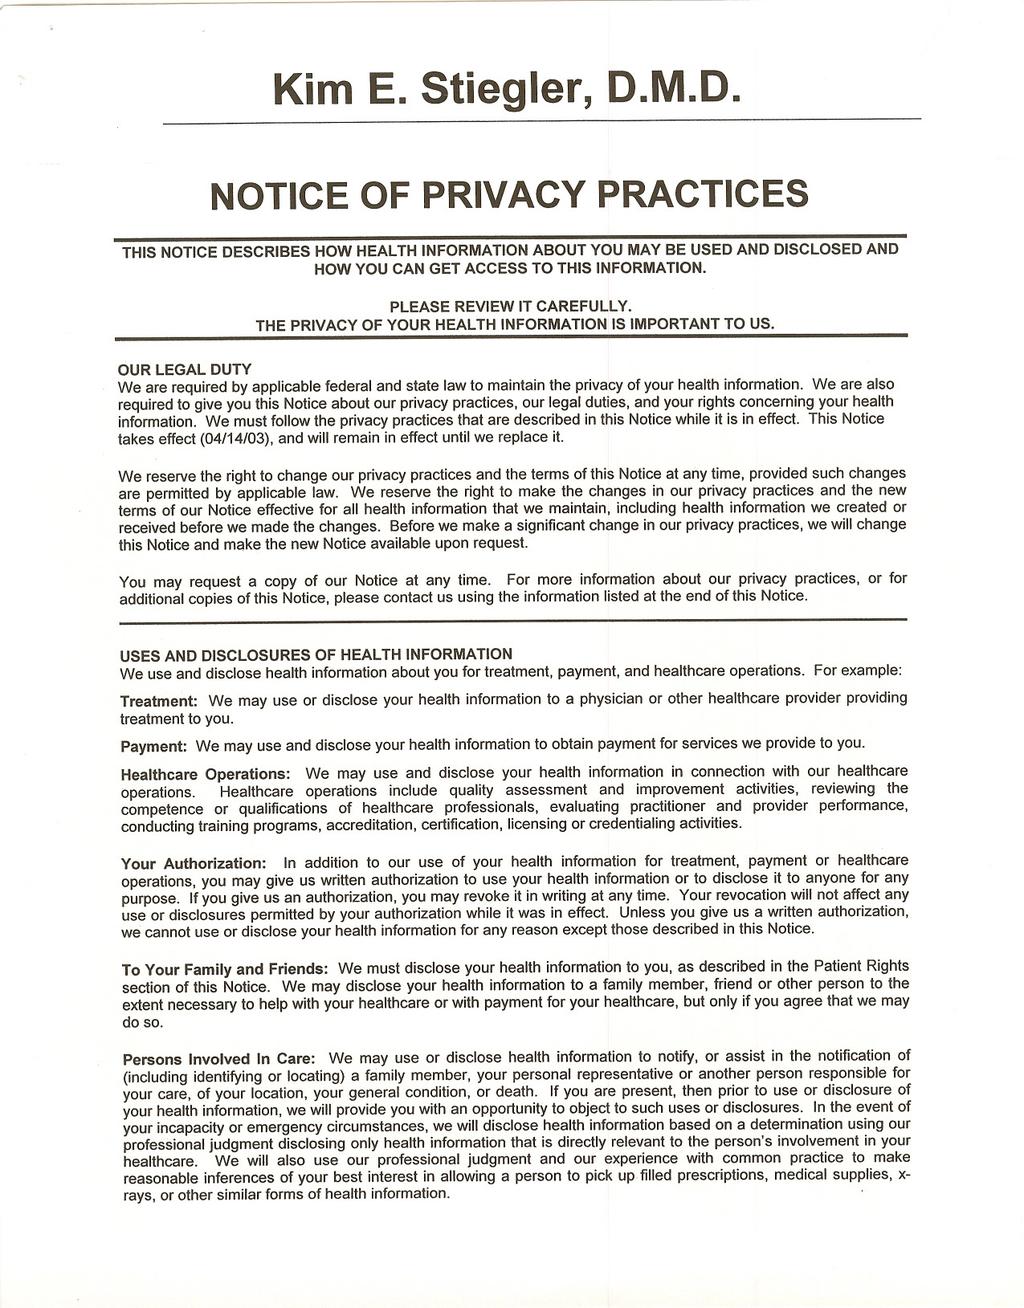 Kim E. Stiegler, D.M.D. NOTICE OF PRIVACY PRACTICES THIS NOTICE DESCRIBES HOW HEALTH INFORMATION ABOUT YOU MAY BE USED AND DISCLOSED AND HOW YOU CAN GET ACCESS TO THIS INFORMATION.